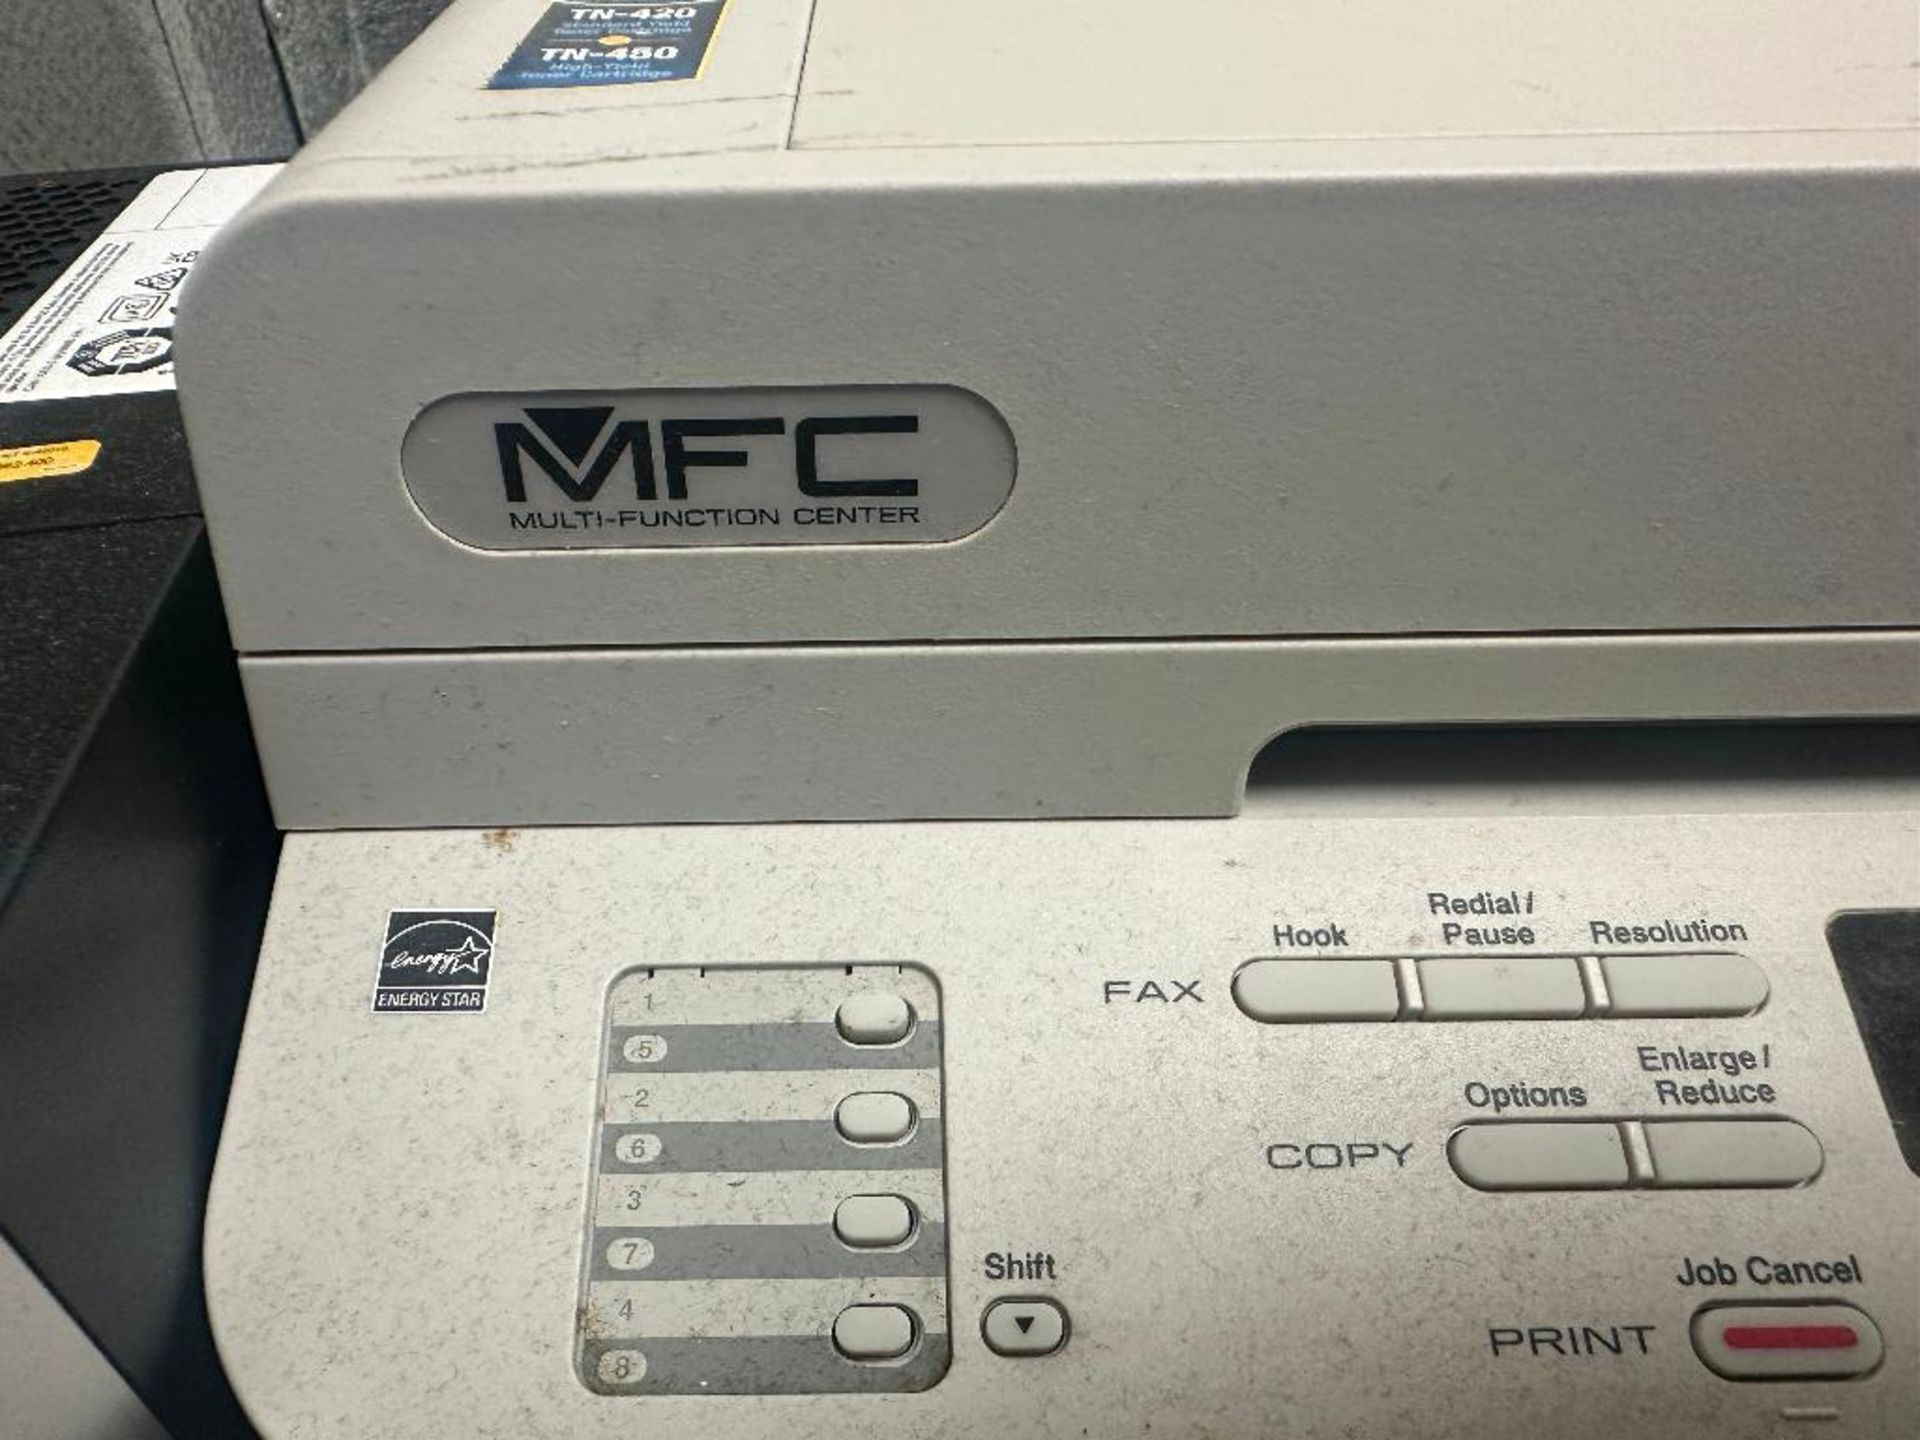 DESCRIPTION BROTHER MFC 7380N ALL IN ONE PRINTER BRAND / MODEL: BROTHER LOCATION 7399 O'Connor Drive - Bild 2 aus 2